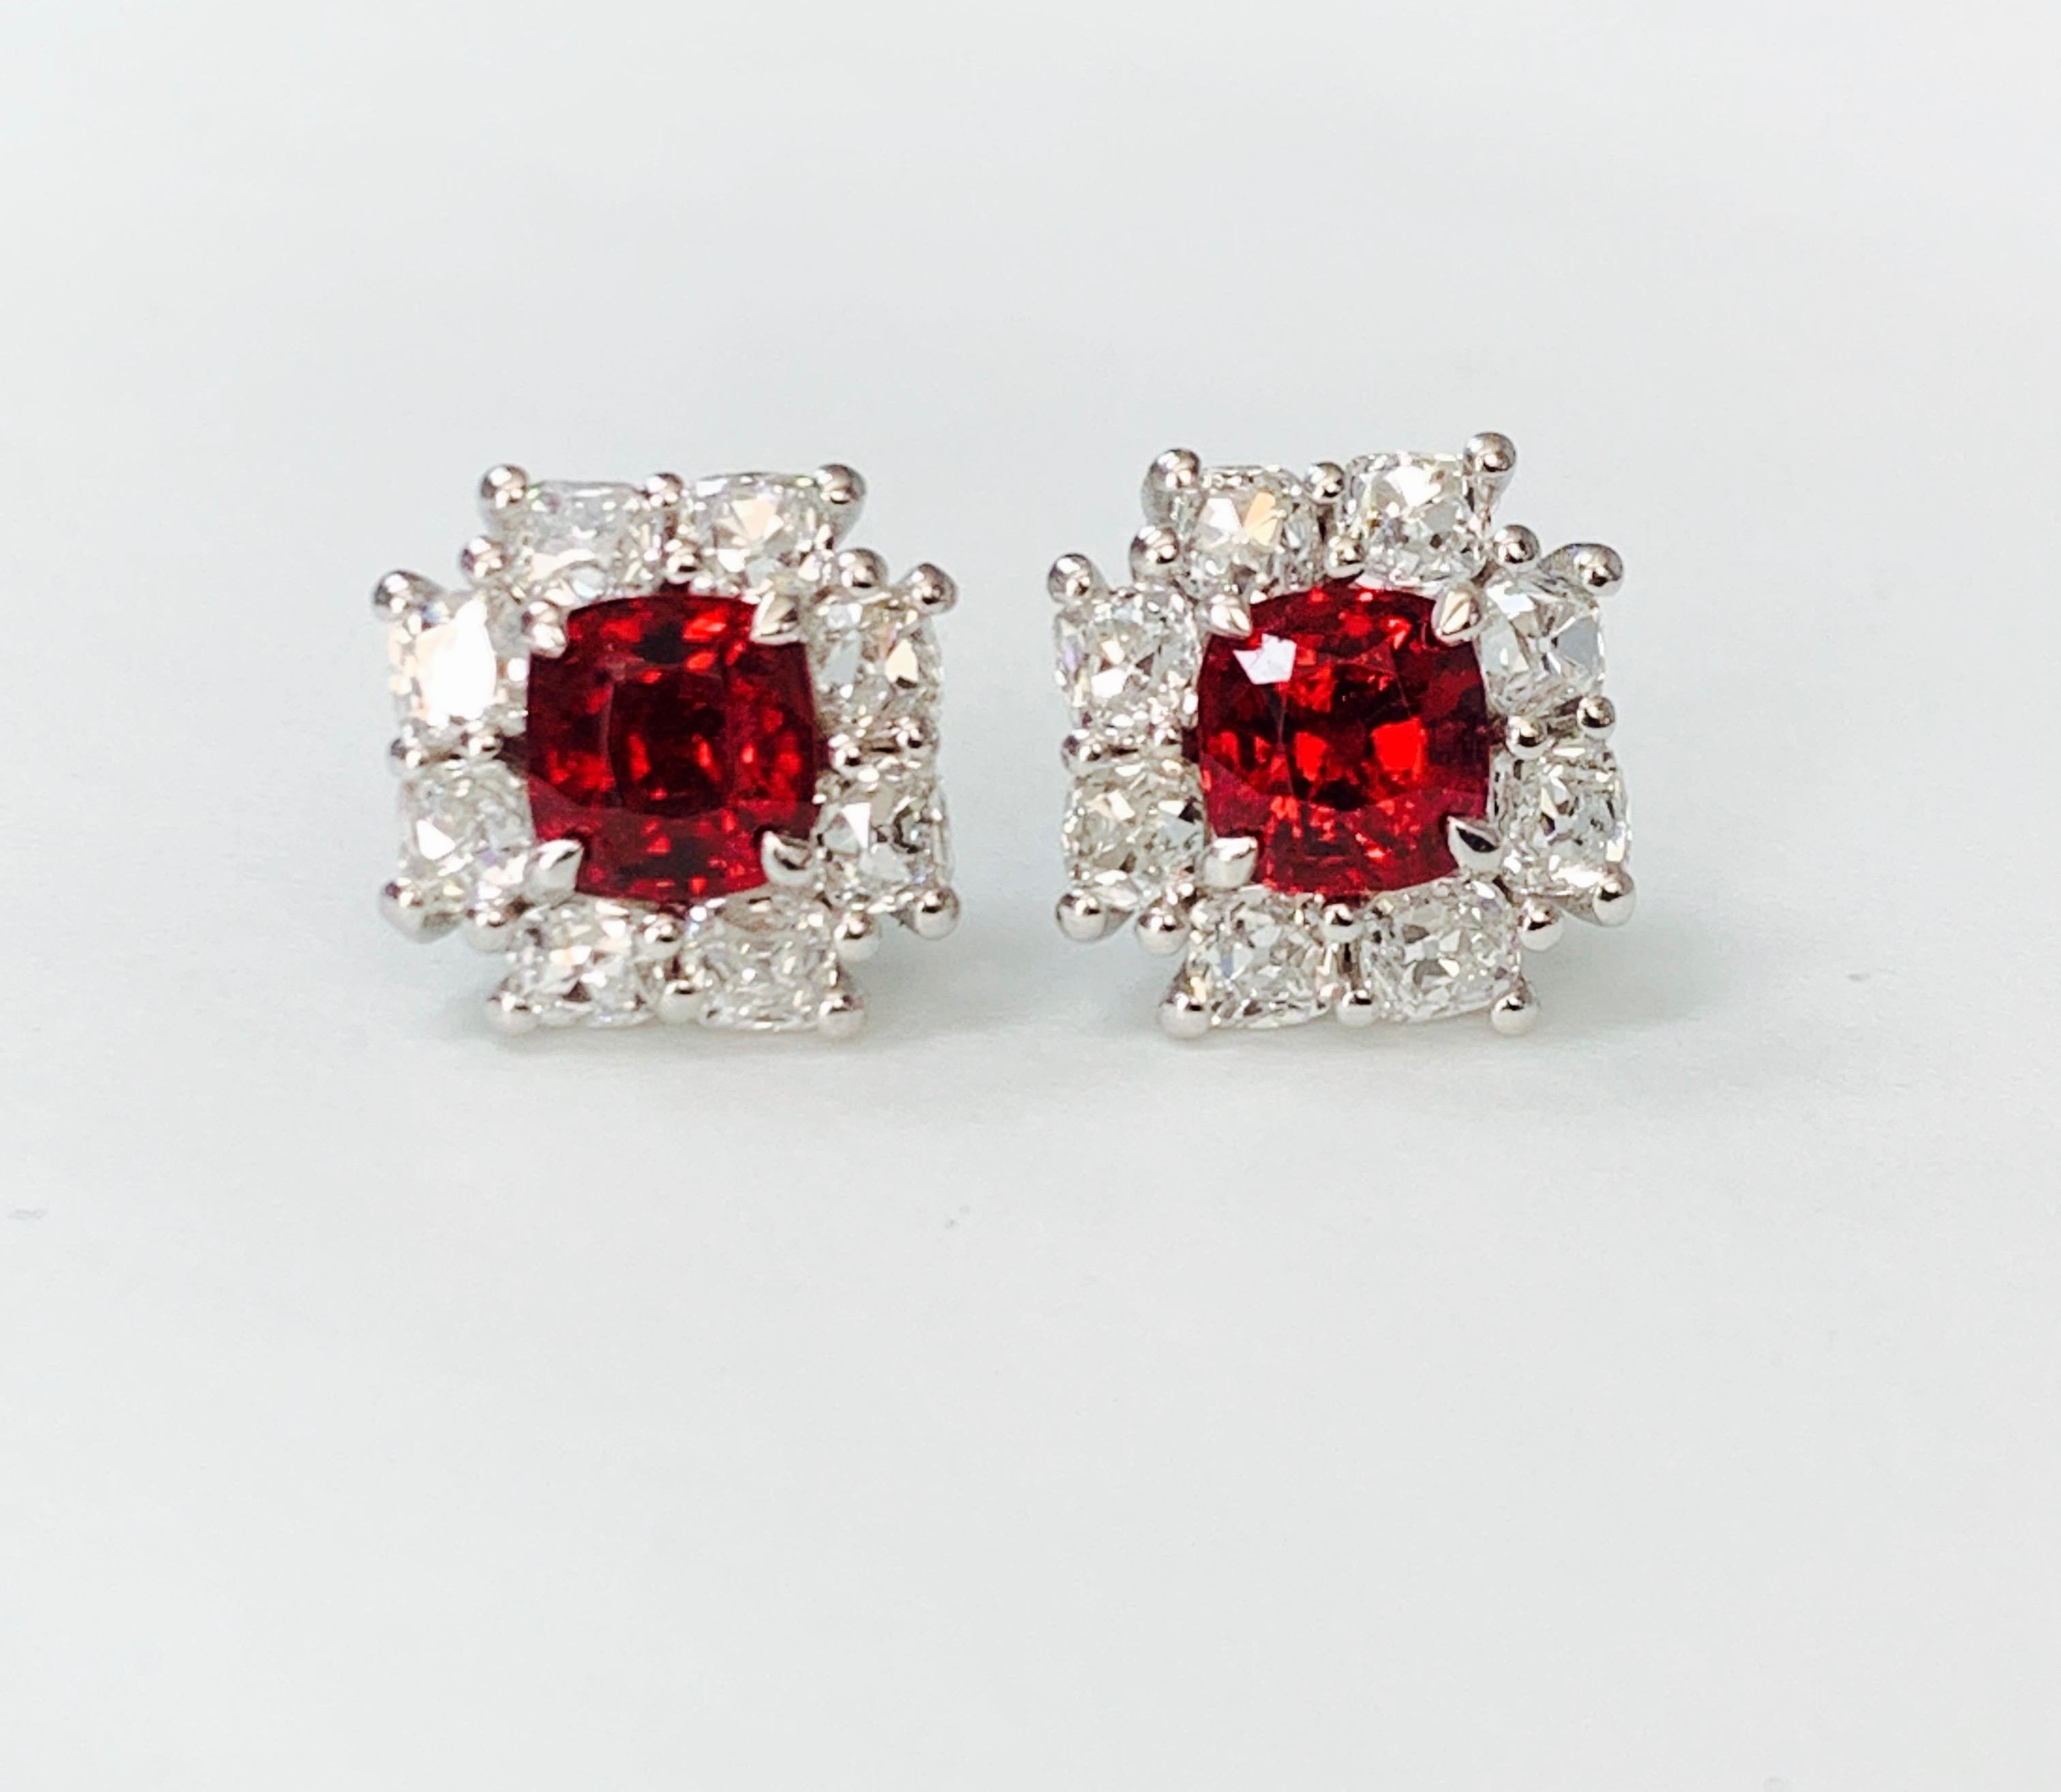 Very attractive GIA certified no heat spinel and diamond stud earrings beautifully hand crafted in platinum. 
The details are as follows : 
Spinel weight : 3.72 carat /2  ( 1.84 carat and 1.88 carat ) 
Old mine cut diamond weight : 4.12 carat/16  (